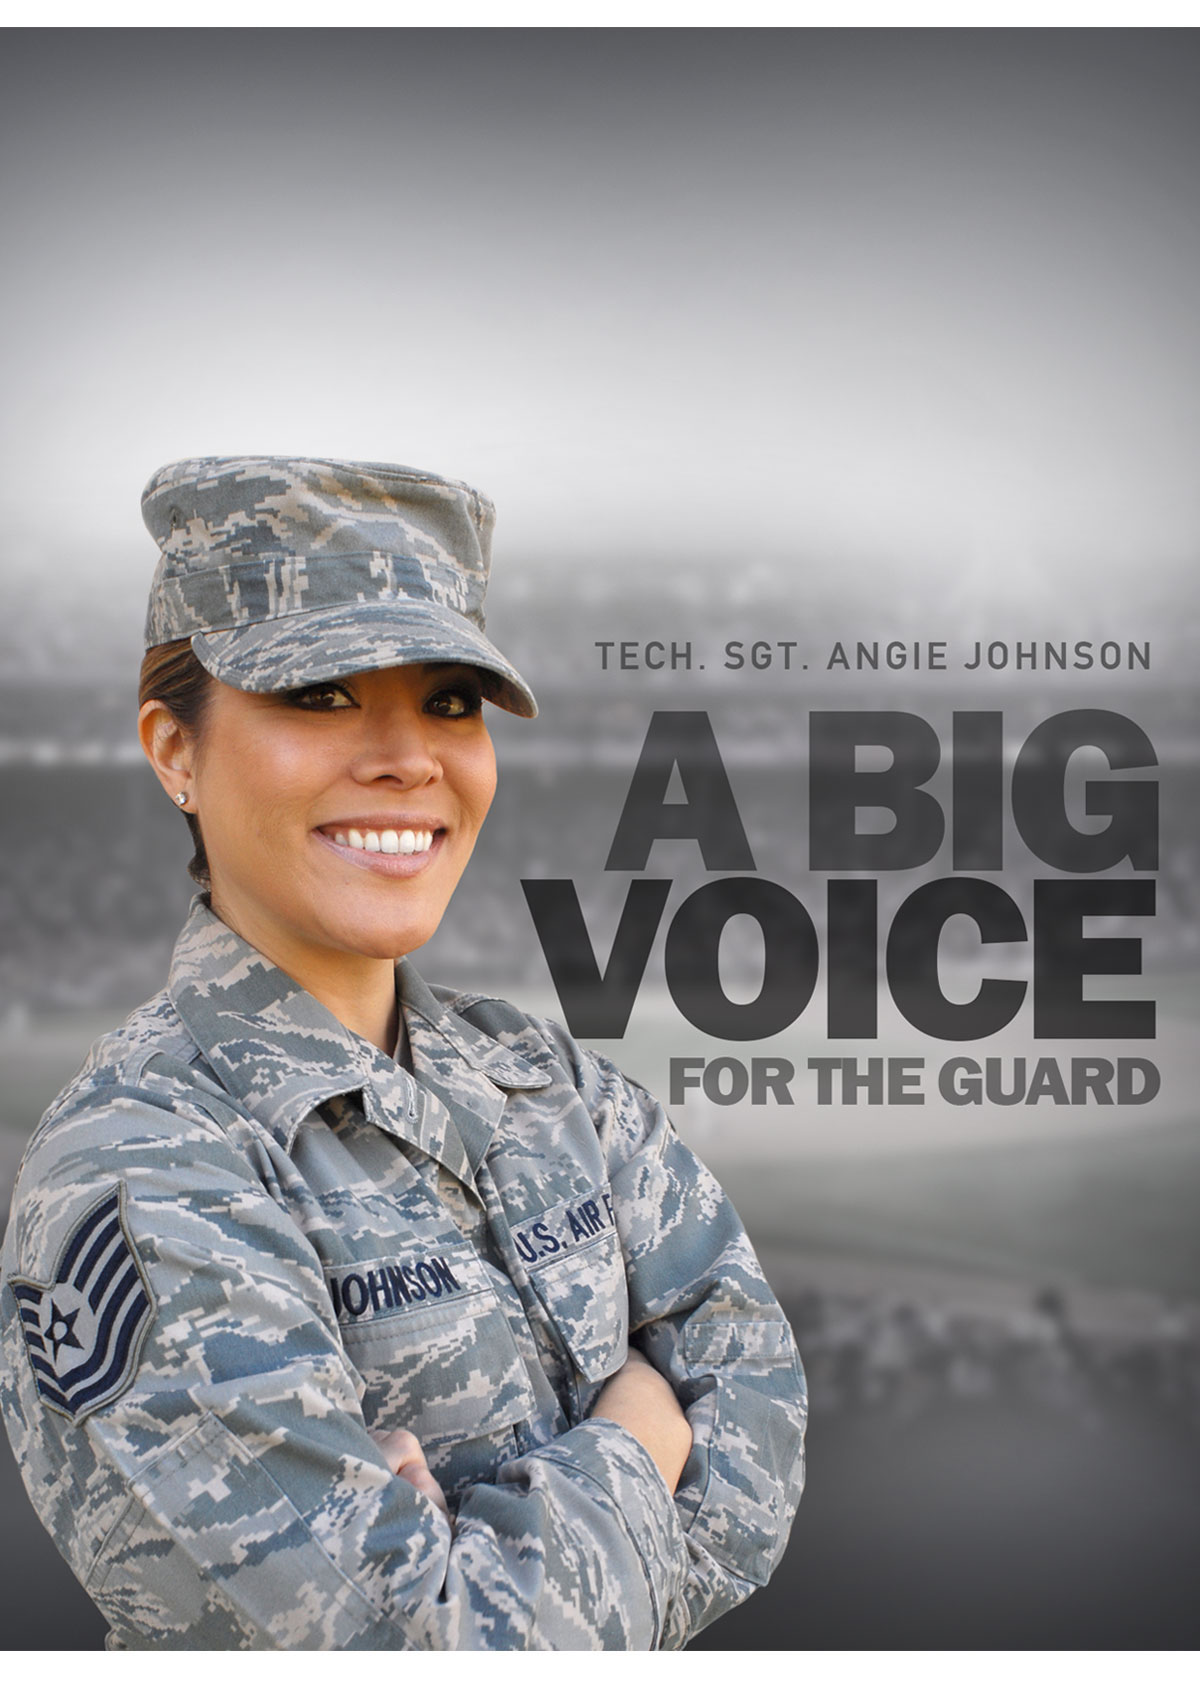 Angie johnson Tennessee voice the national guard soldier female Singer magazine Military country Nashville